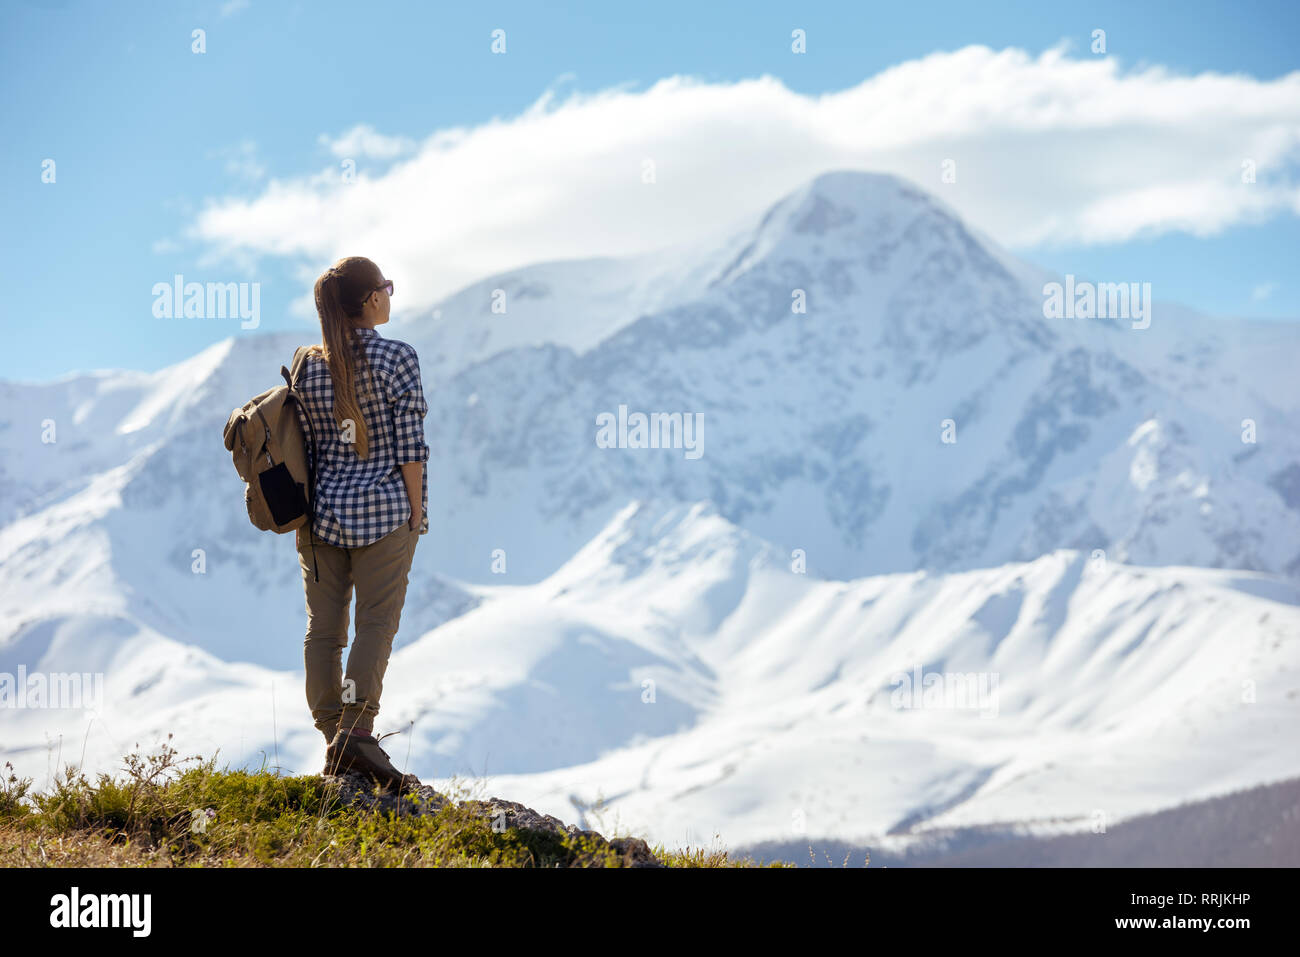 Woman with backpack stands on viewpoint and looks at mountains Stock Photo